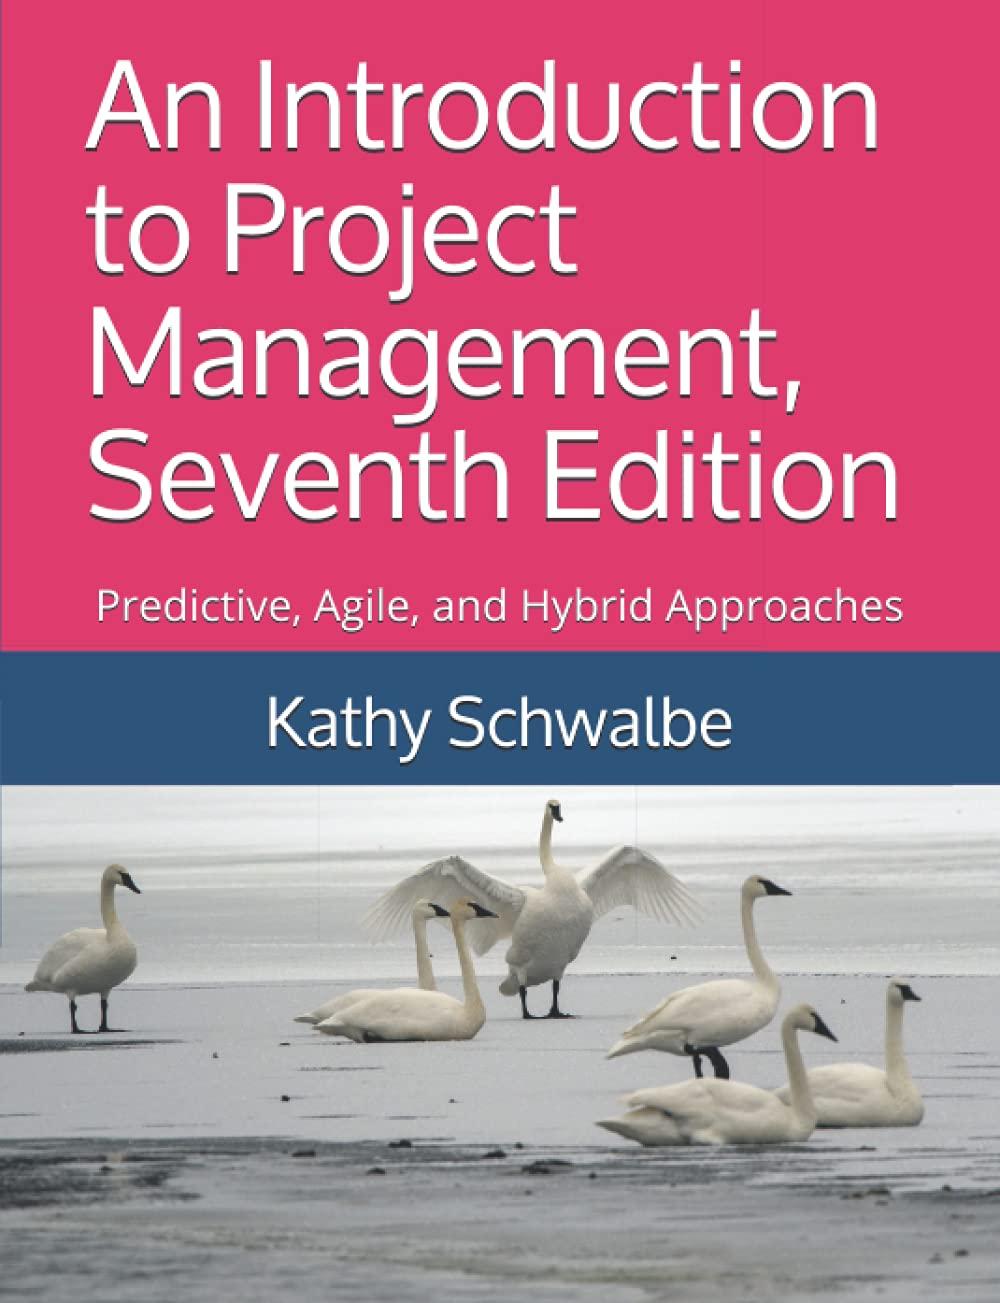 an introduction to project management predictive agile and hybrid approaches 7th edition kathy schwalbe